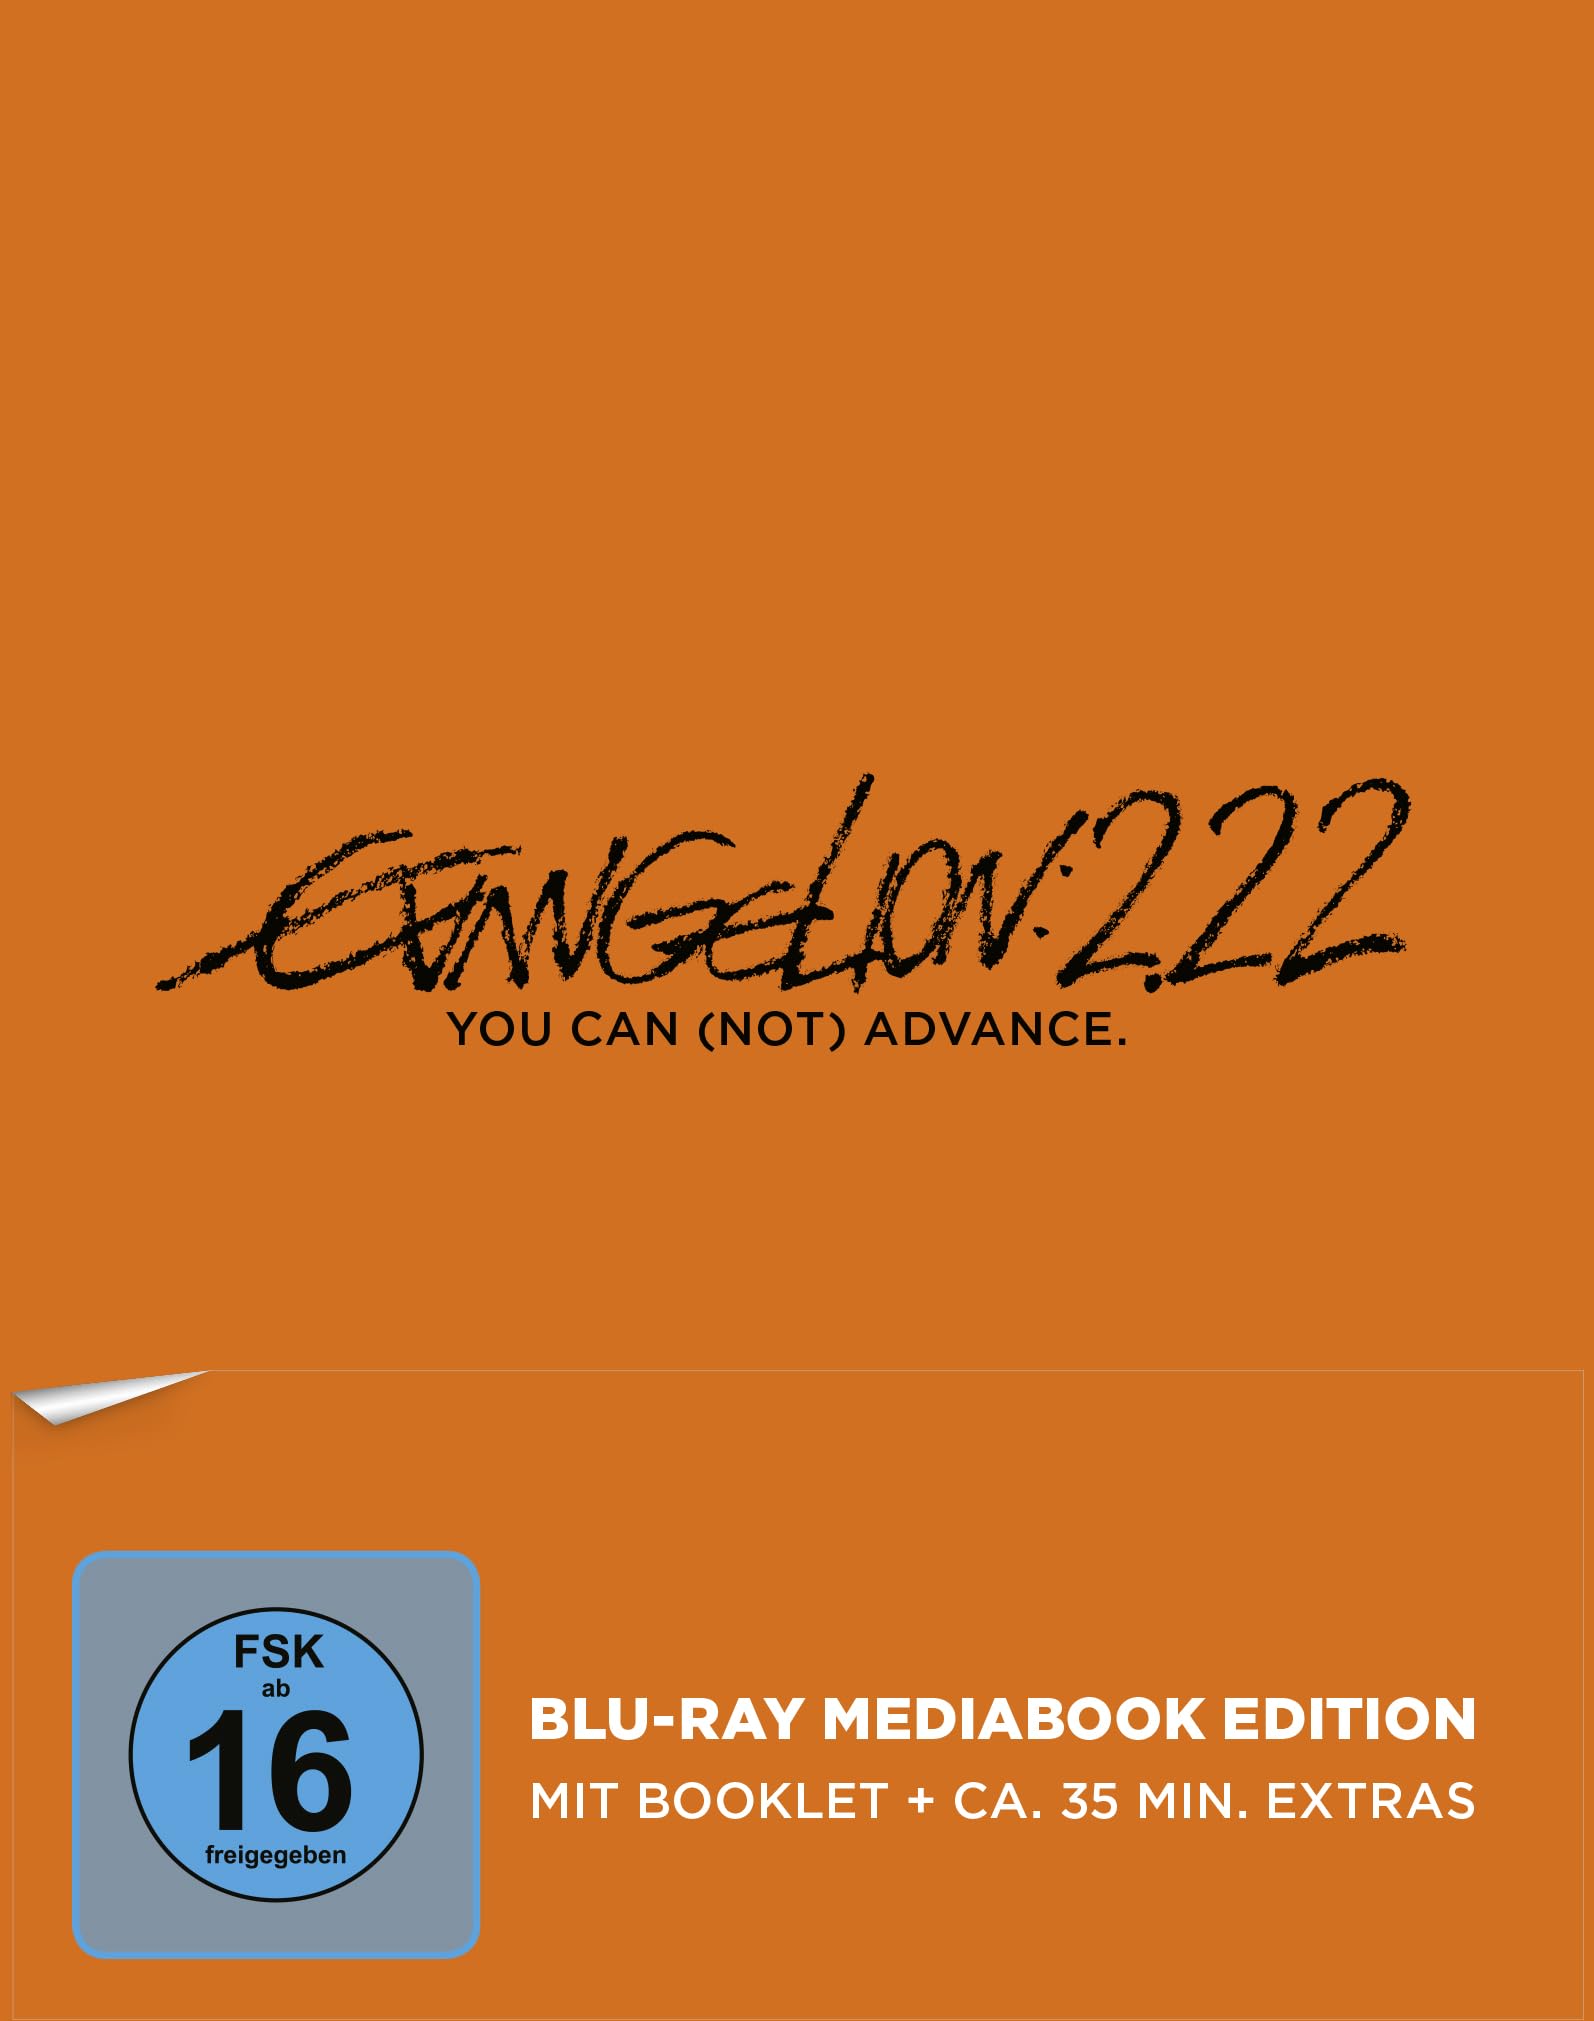 Evangelion: 2.22 You Can (Not) Advance [Blu-ray] (Mediabook Special Edition)